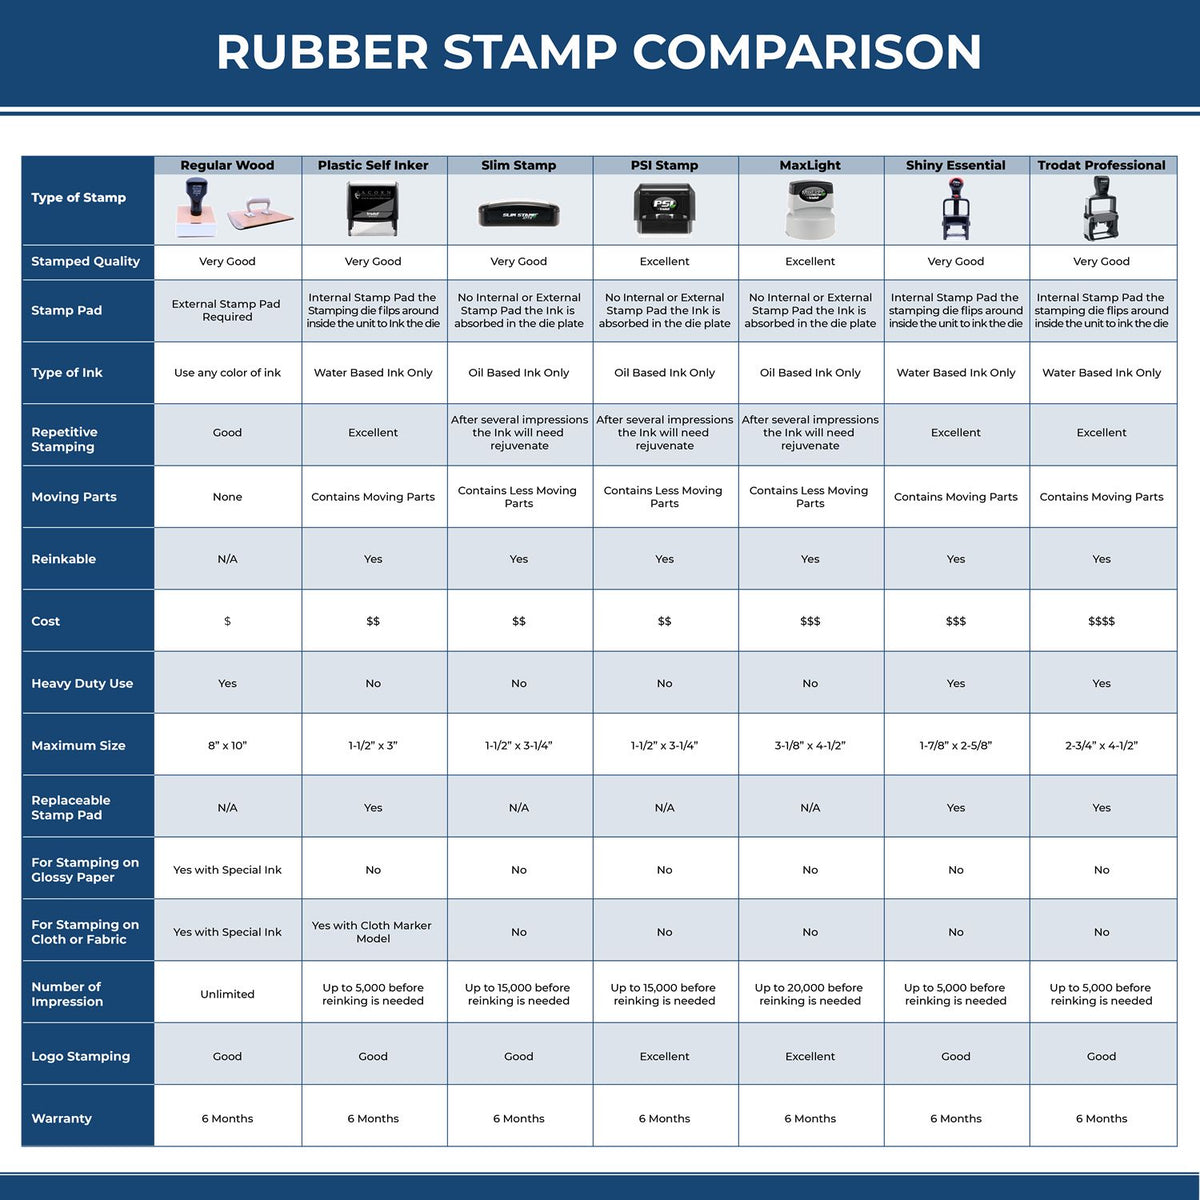 Large Self-Inking Allergies Stamp 4982S Rubber Stamp Comparison